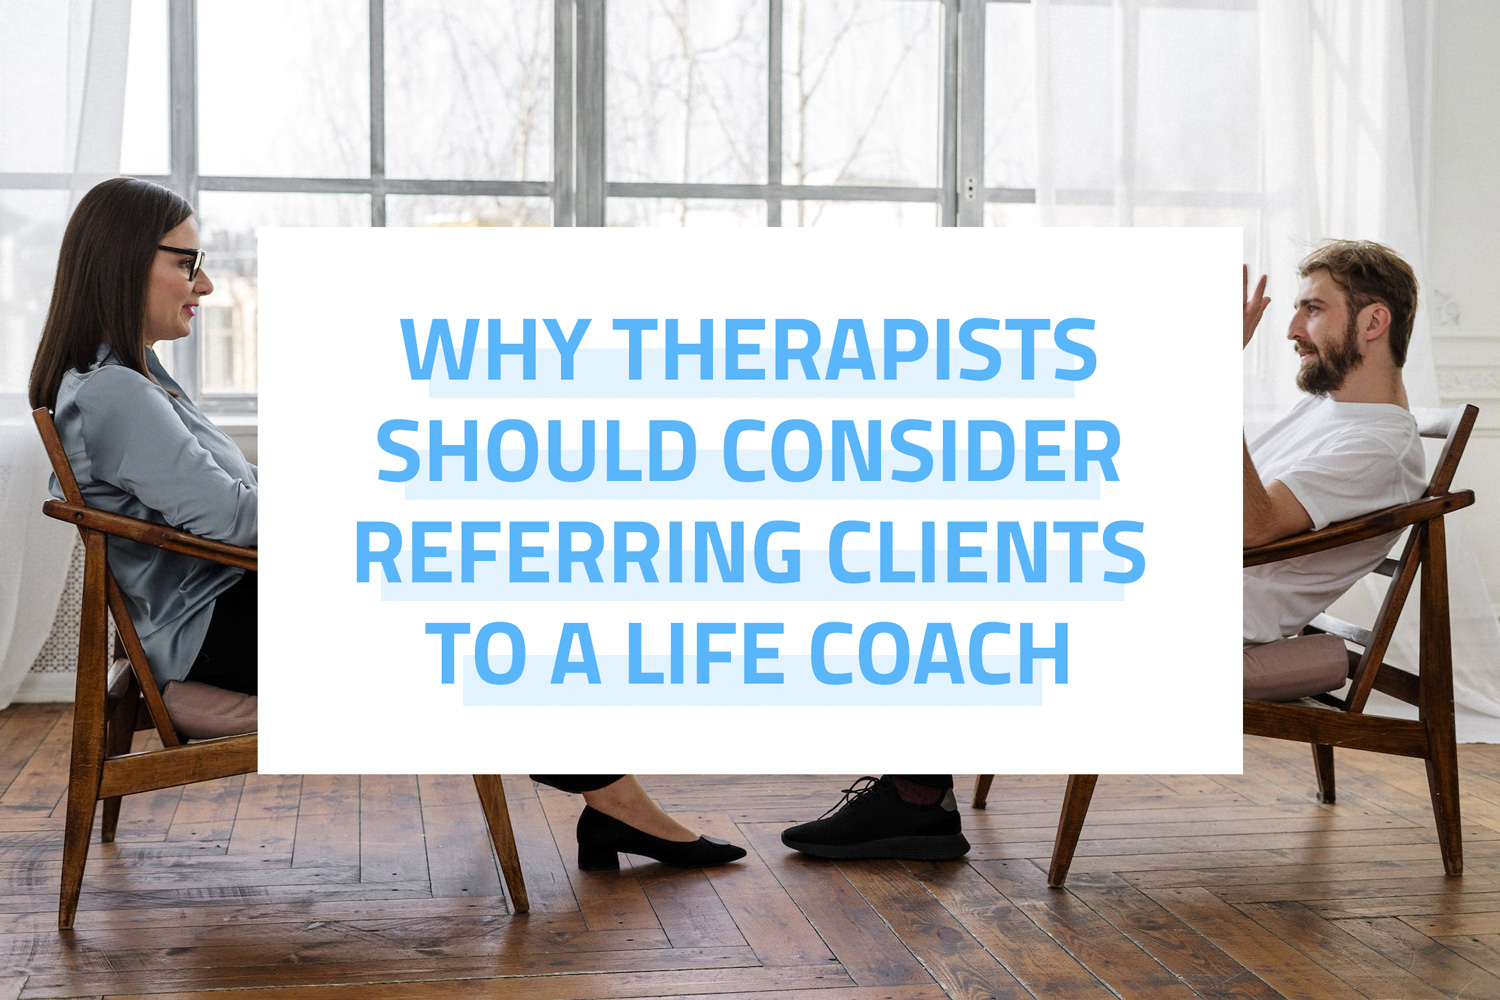 Why Therapists Should Consider Referring Clients to a Life Coach